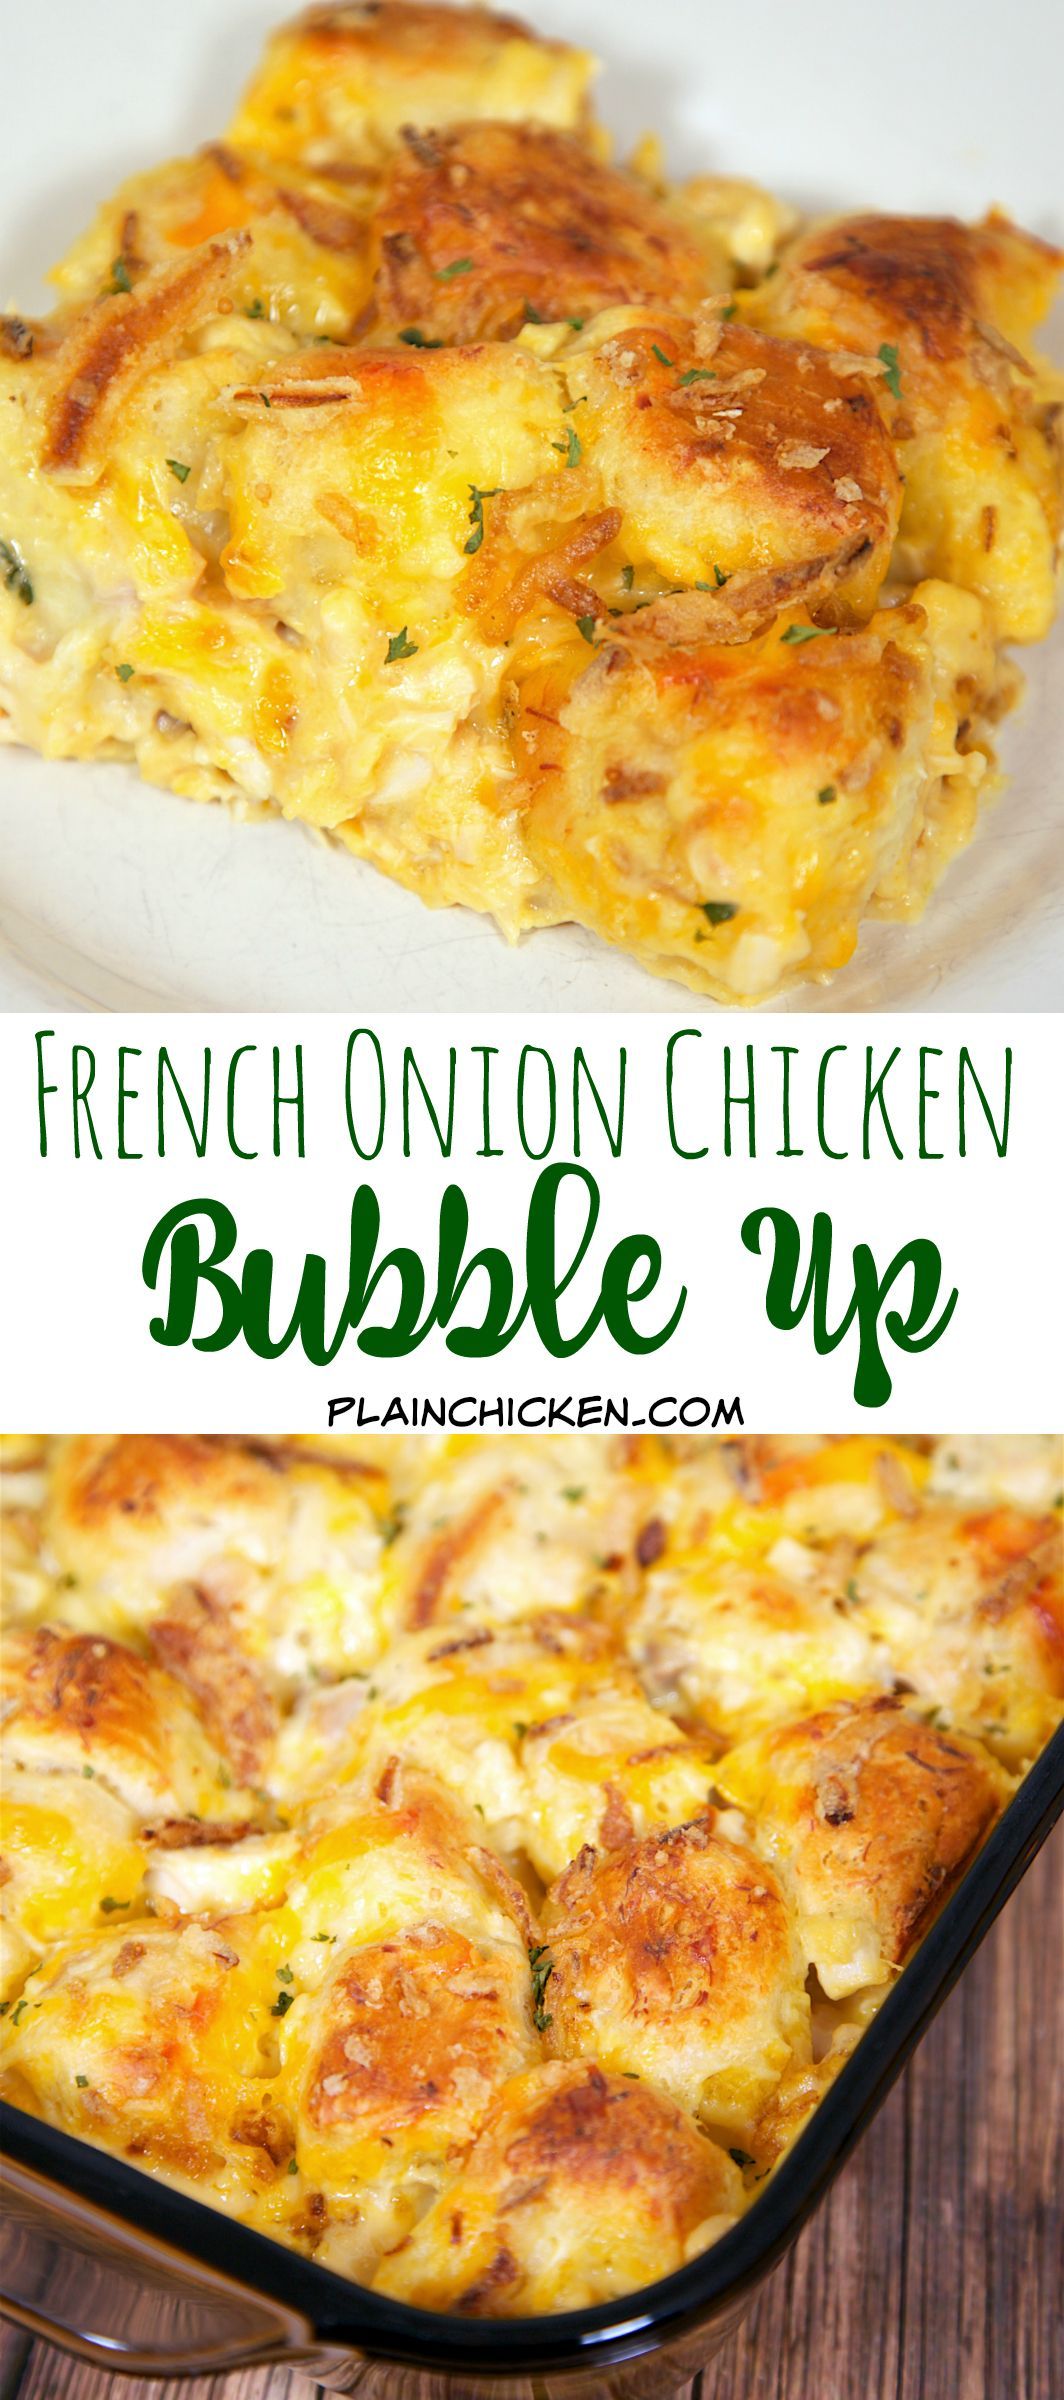 French Onion Chicken Bubble Up – AMAZING! We literally licked our plates! Chicken, French Onion Dip, Chick